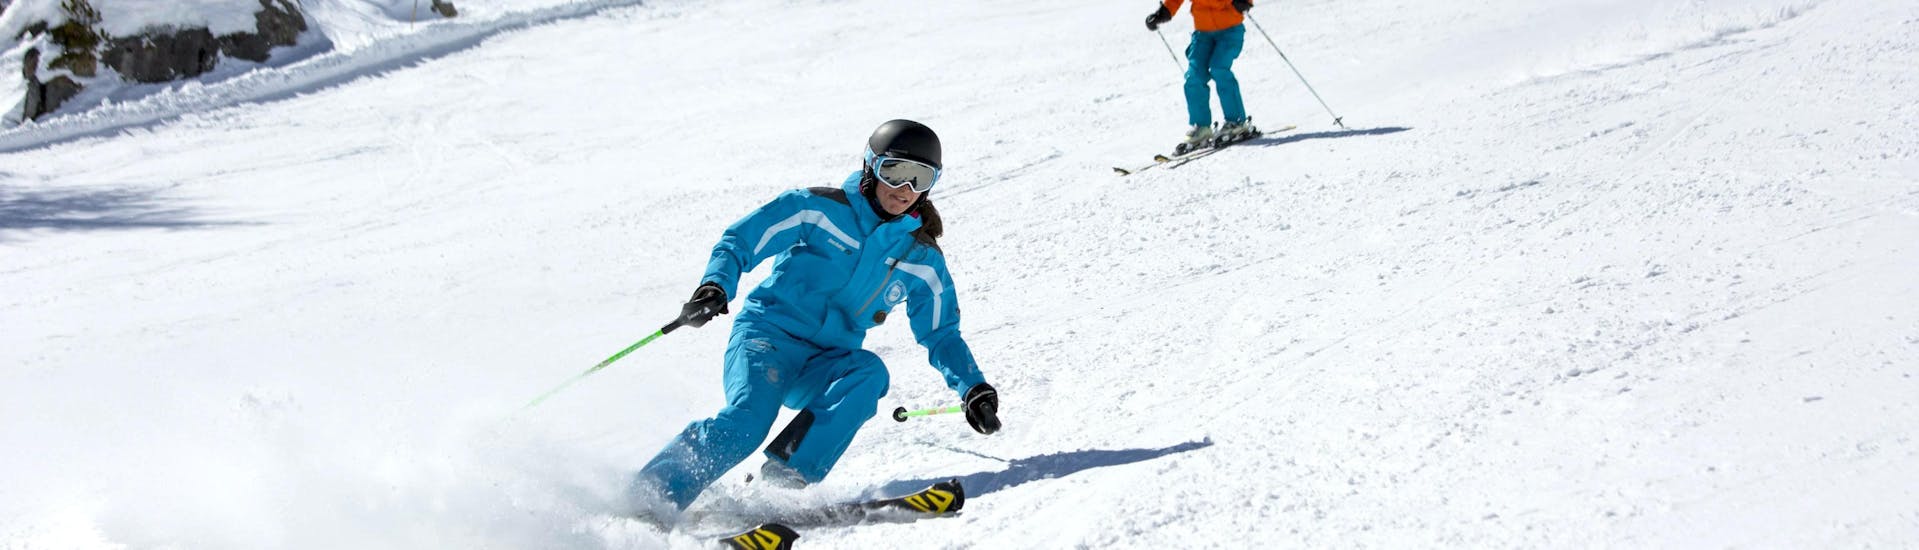 A skier is skiing down a snowy slope behind their ski instructor from the ski school ESI Font Romeu during their Private Ski Lessons for Adults - Holiday - All Levels.